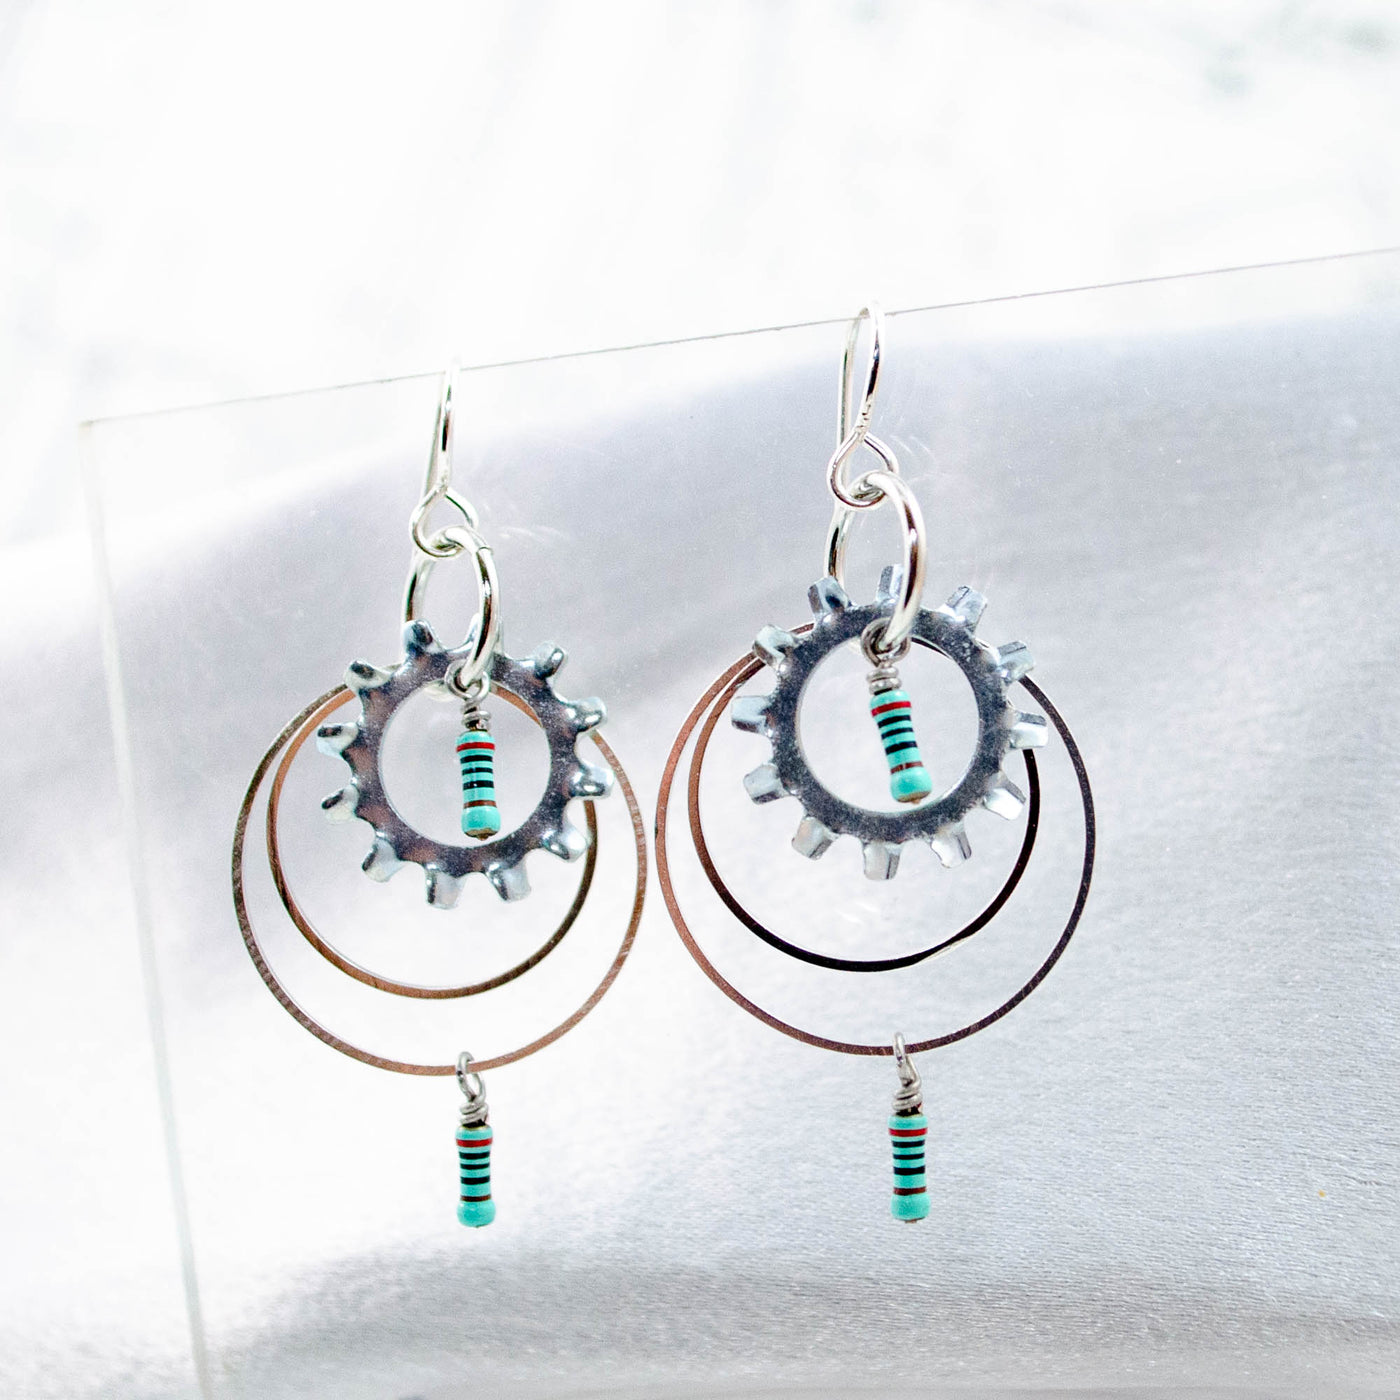 Electronic Component Earrings - Resistors and Washers